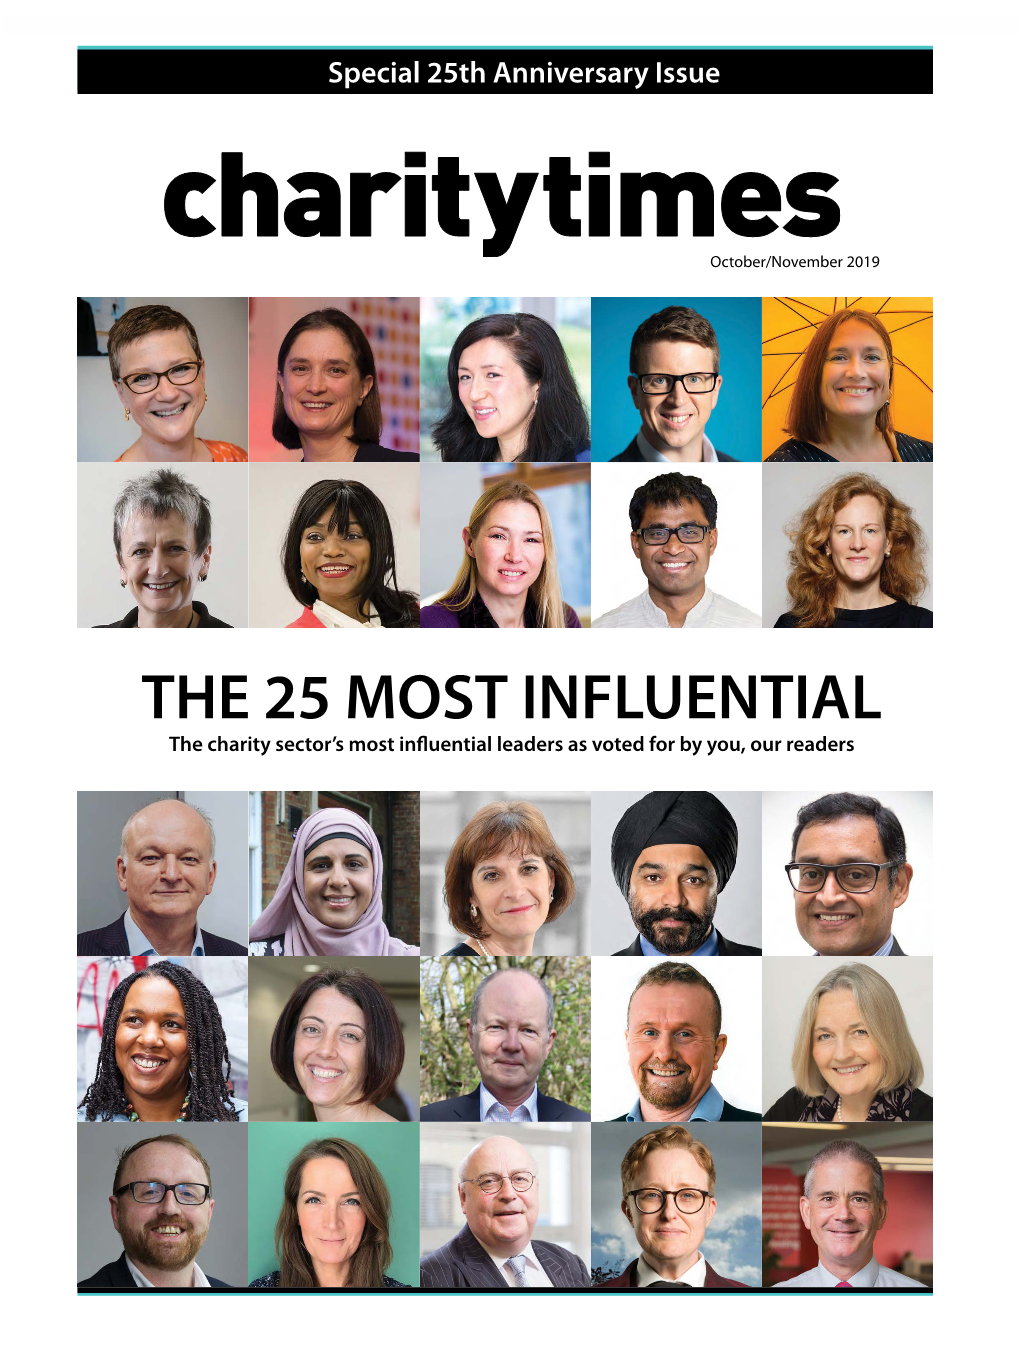 The 25 Most Influential